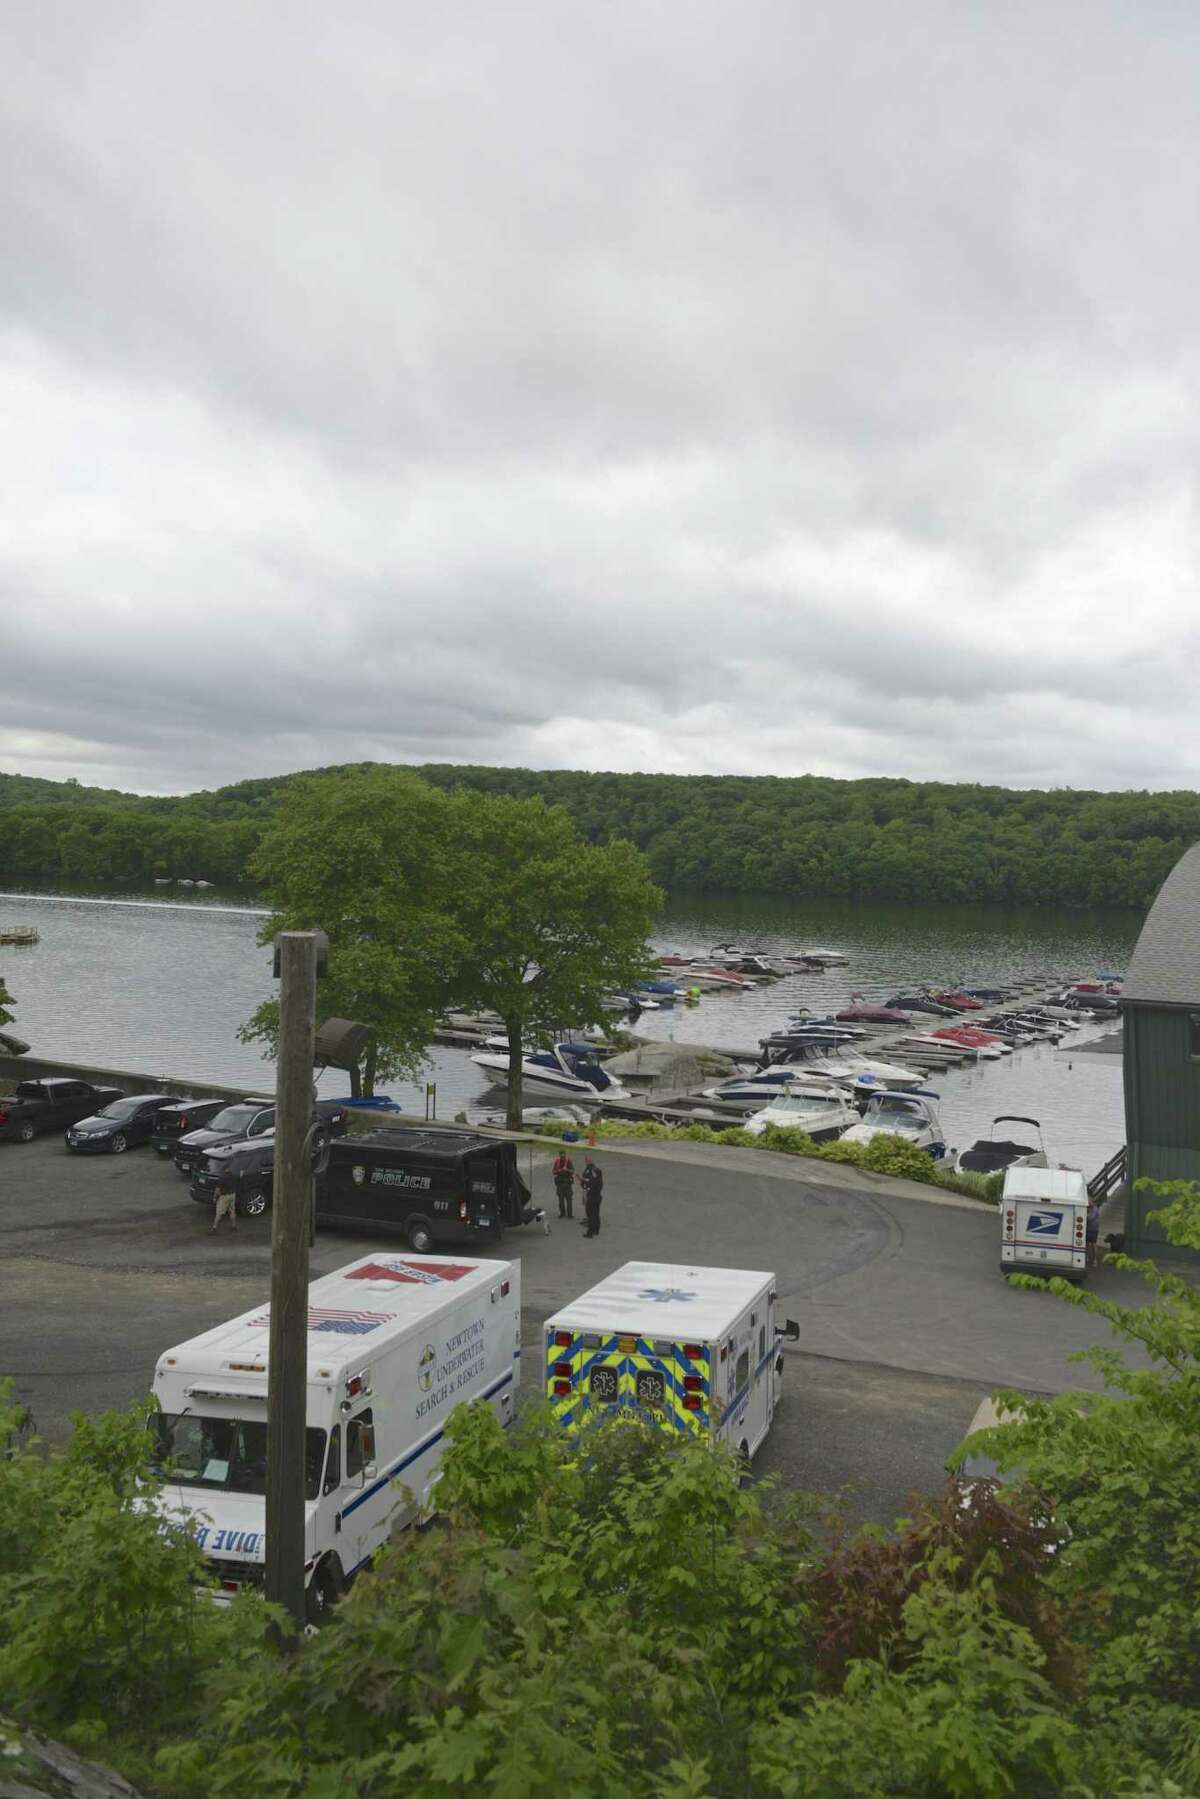 Search and rescue teams get ready to leave the parking lot of Gerard's Waters Edge Maria less than an hour after finding the body of Joshua Dasilva in Candlewood Lake on Wednesday. Officials had been searching for Dasilva, of New Milford, after he went missing while swimming with friends on Monday. May 29, 2019, in New Milford, Conn. Search and rescue efforts were based at the marina.